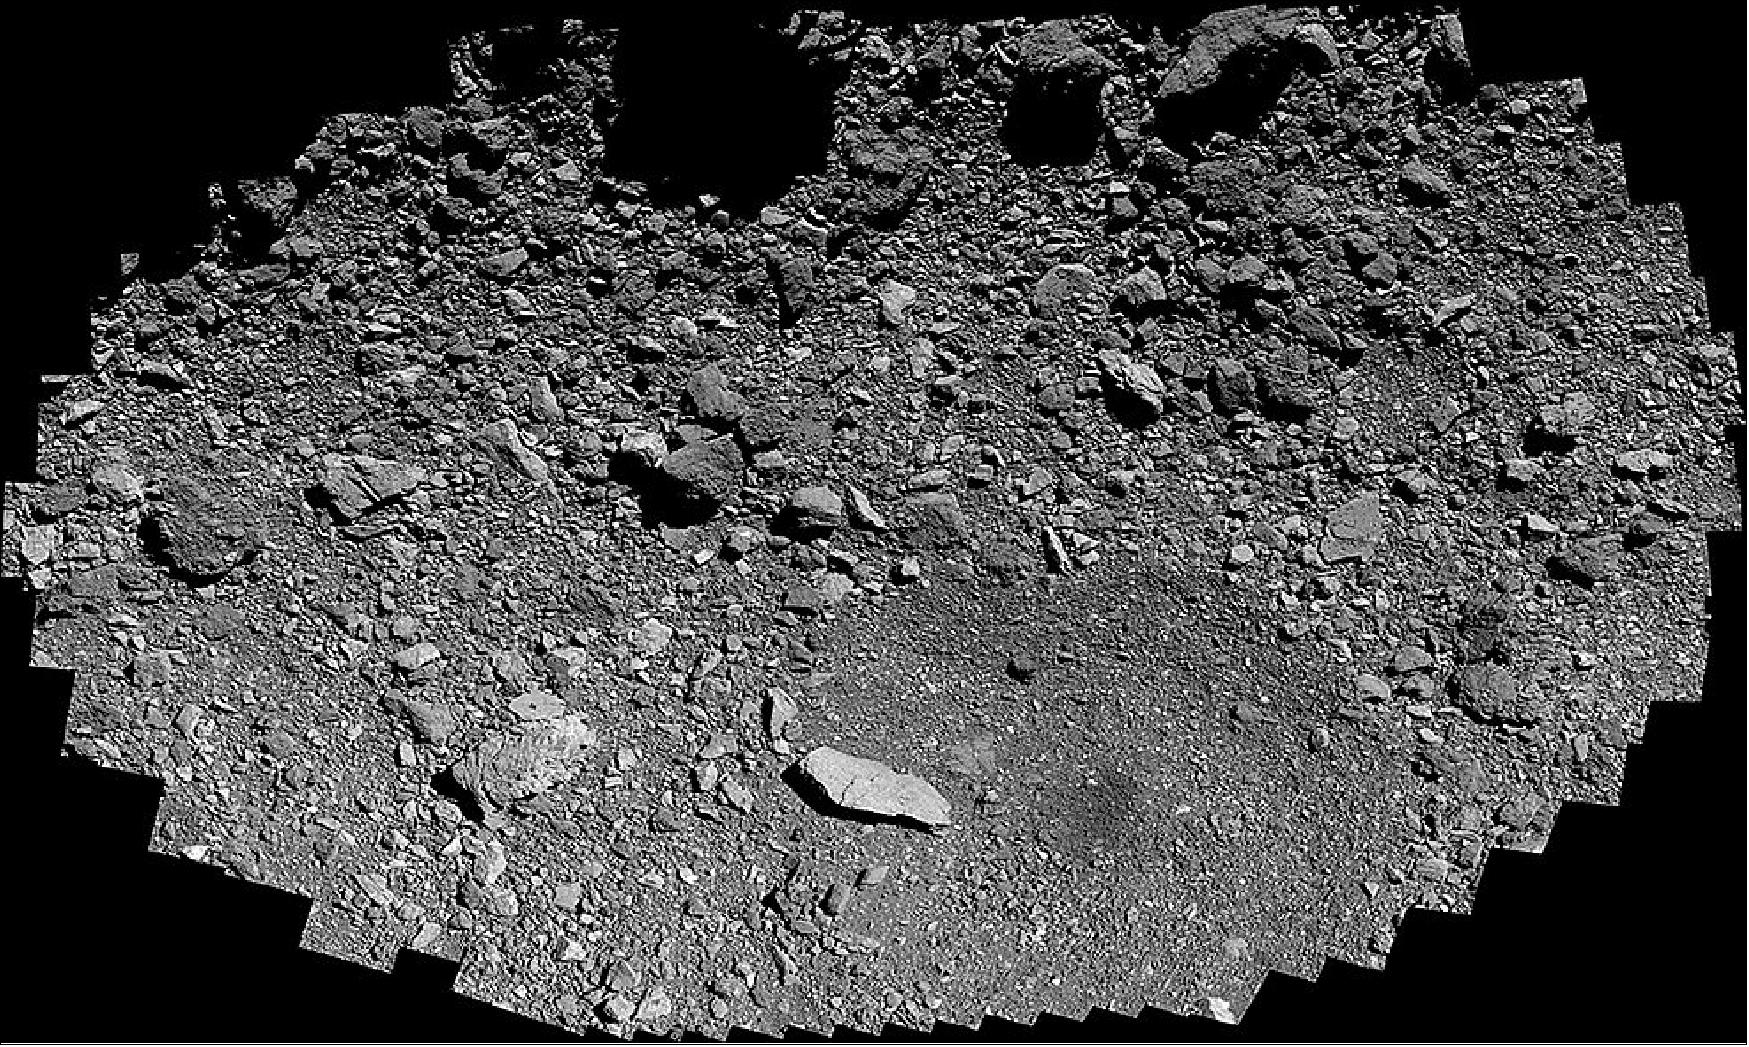 Figure 35: The sample site is located in the crater at the bottom of the image, just above the dark patch at the crater’s center. The long, light-colored boulder to the left of the dark patch, named Strix Saxum, is 17 ft (5.2 m) in length. The mosaic is rotated so that Bennu’s east is at the top of the image (image credit: NASA/Goddard/University of Arizona)